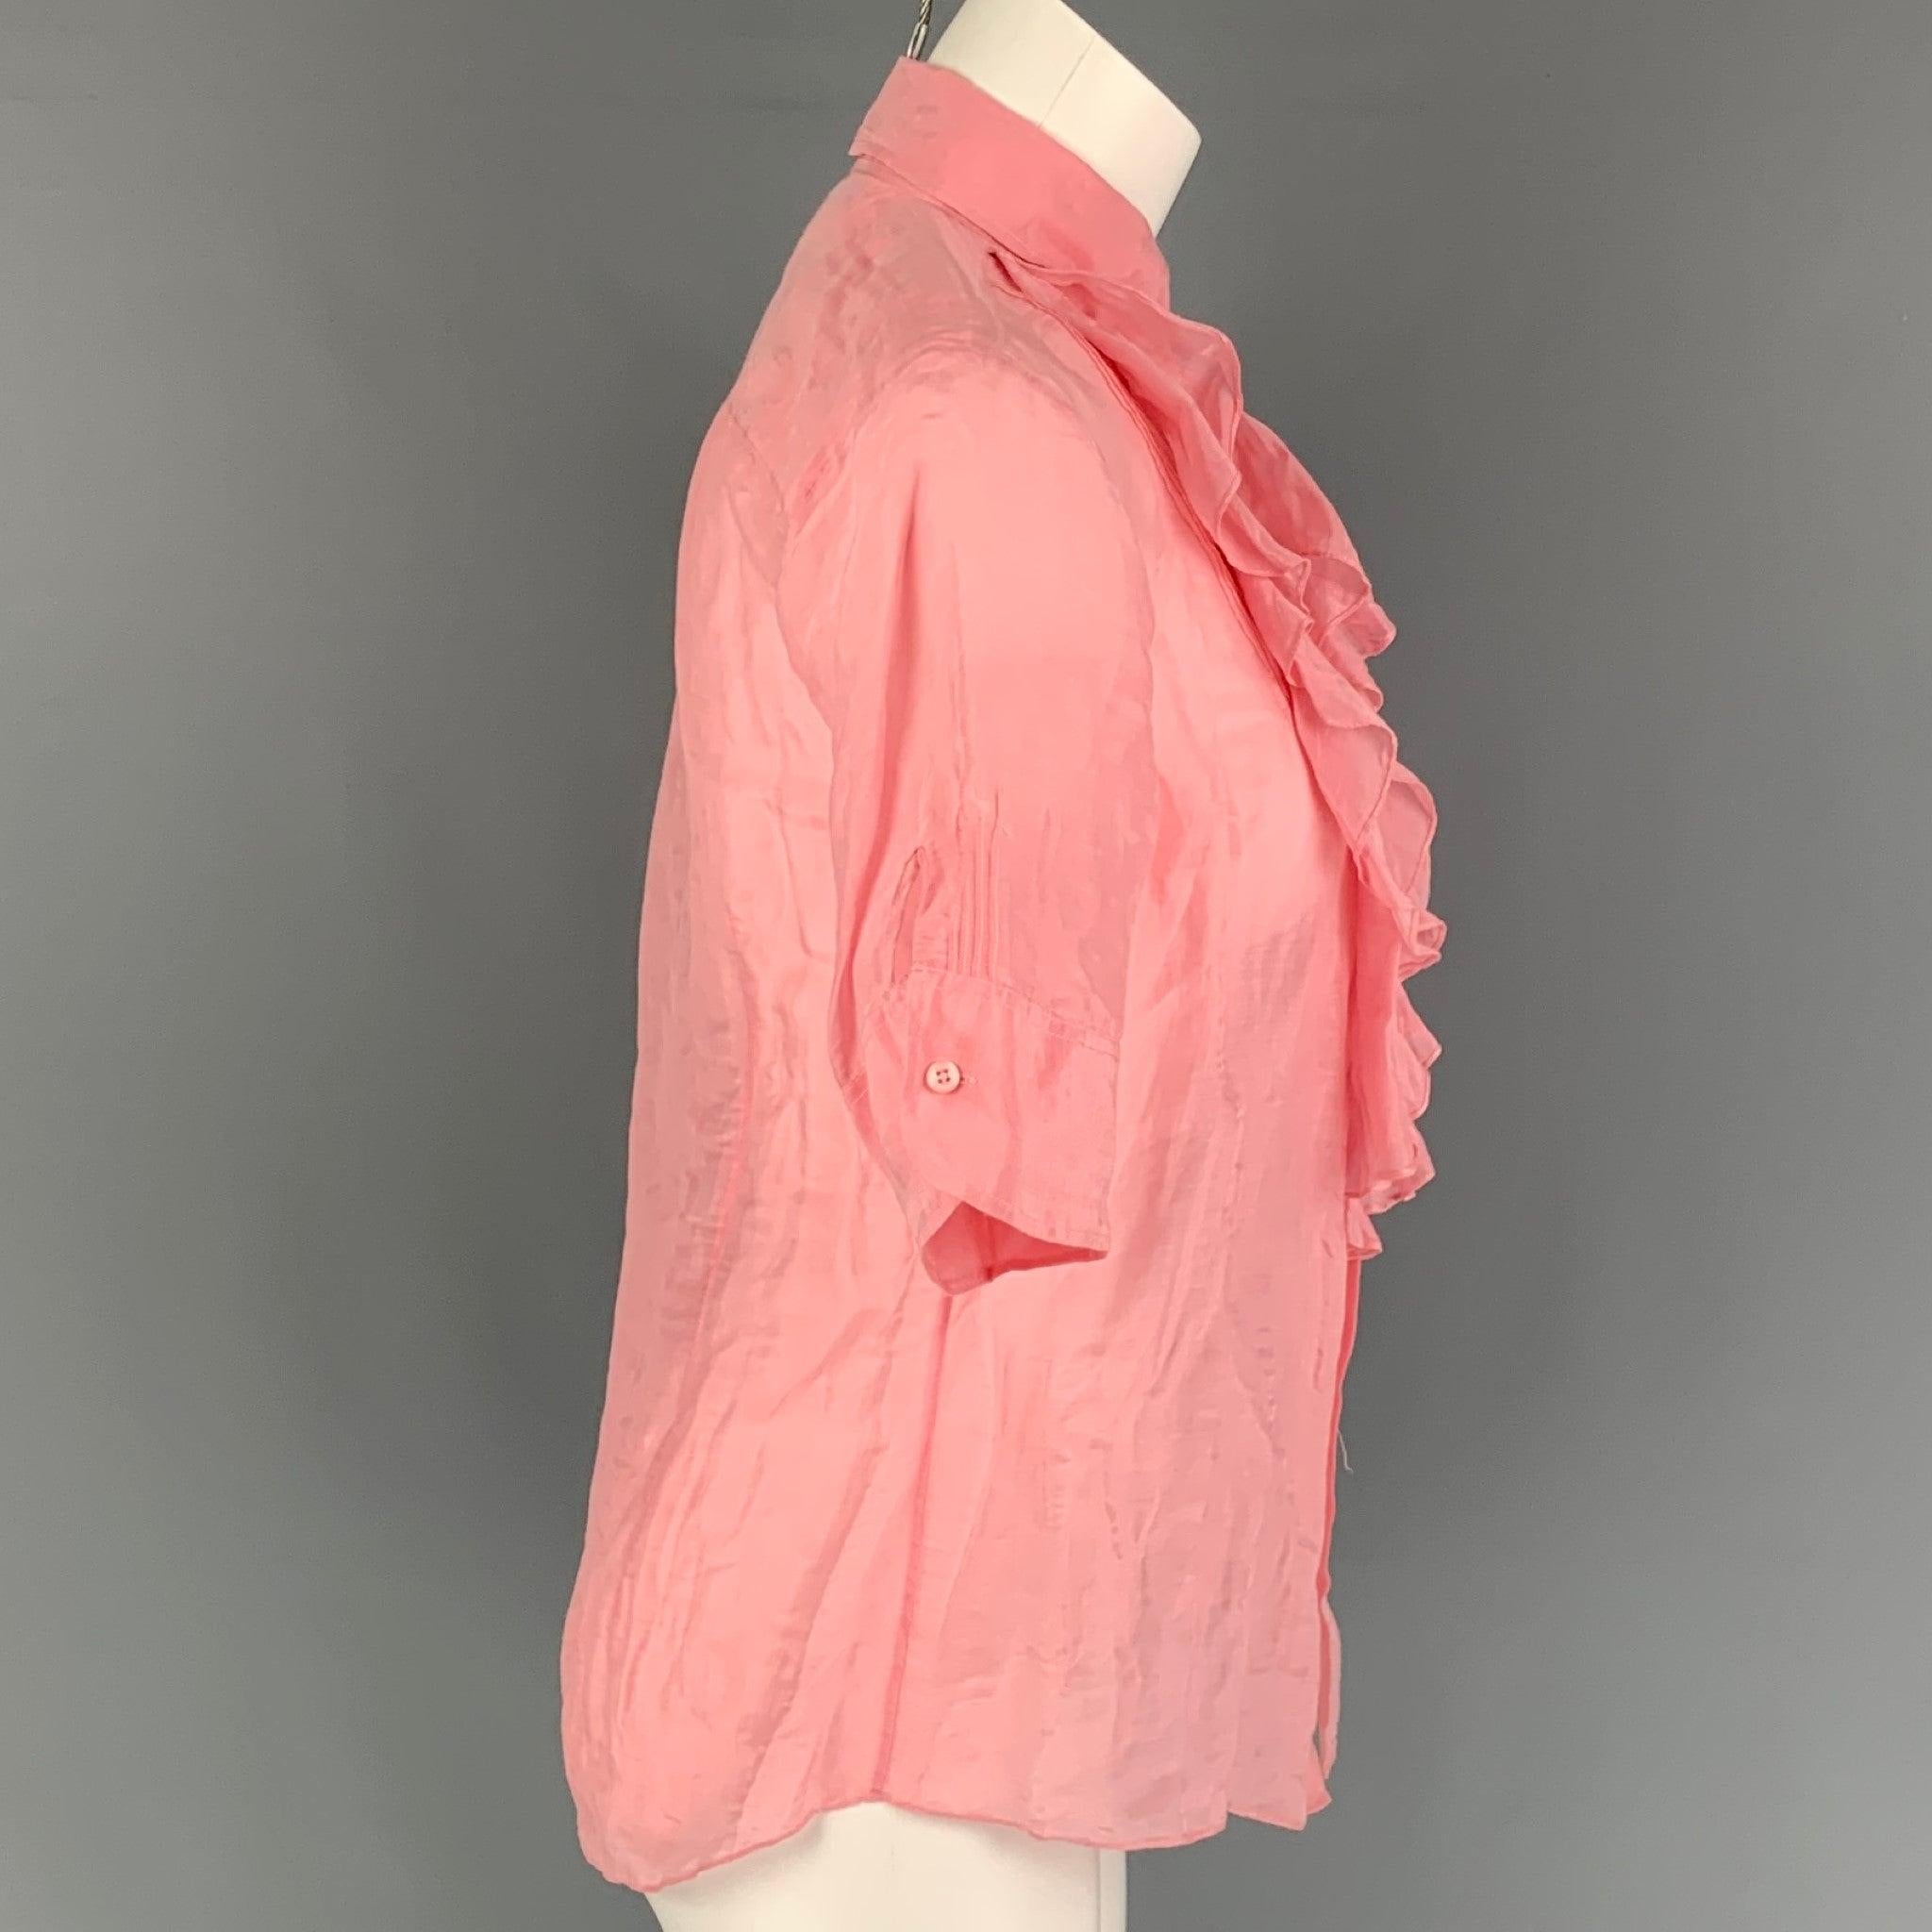 RALPH LAUREN 'Black Label' blouse comes in a pink material featuring a front ruffled design, spread collar, and a button up closure.
Very Good
Pre-Owned Condition. 

Marked:   8 

Measurements: 
 
Shoulder: 15.5 inches  Bust: 36 inches  Sleeve: 11